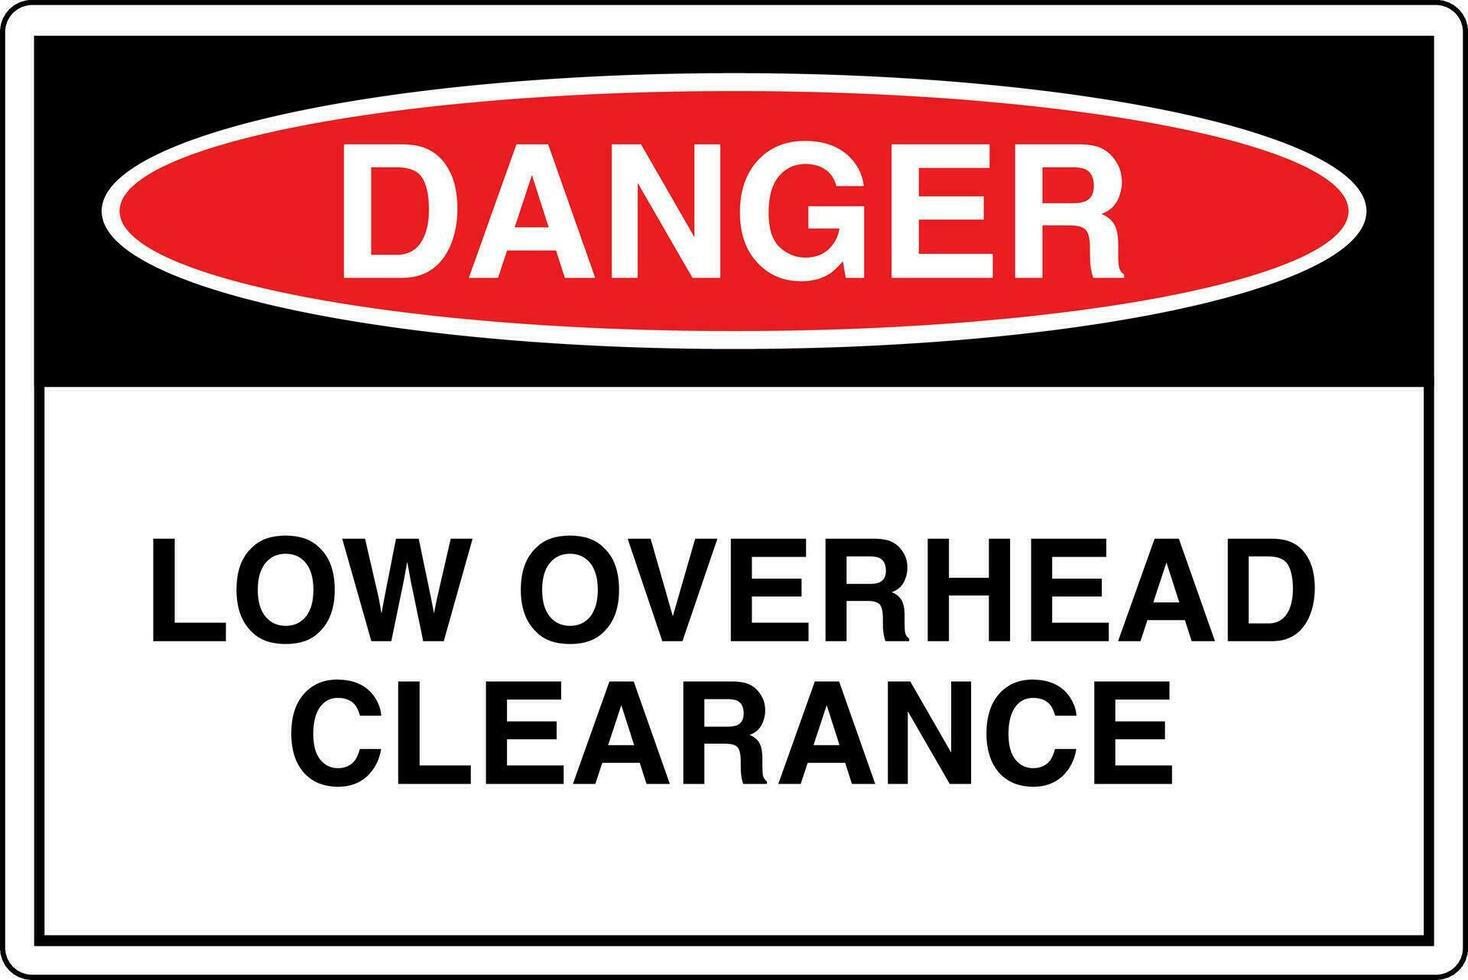 OSHA standards symbols registered workplace safety sign danger caution warning LOW OVERHEAD CLEARANCE vector